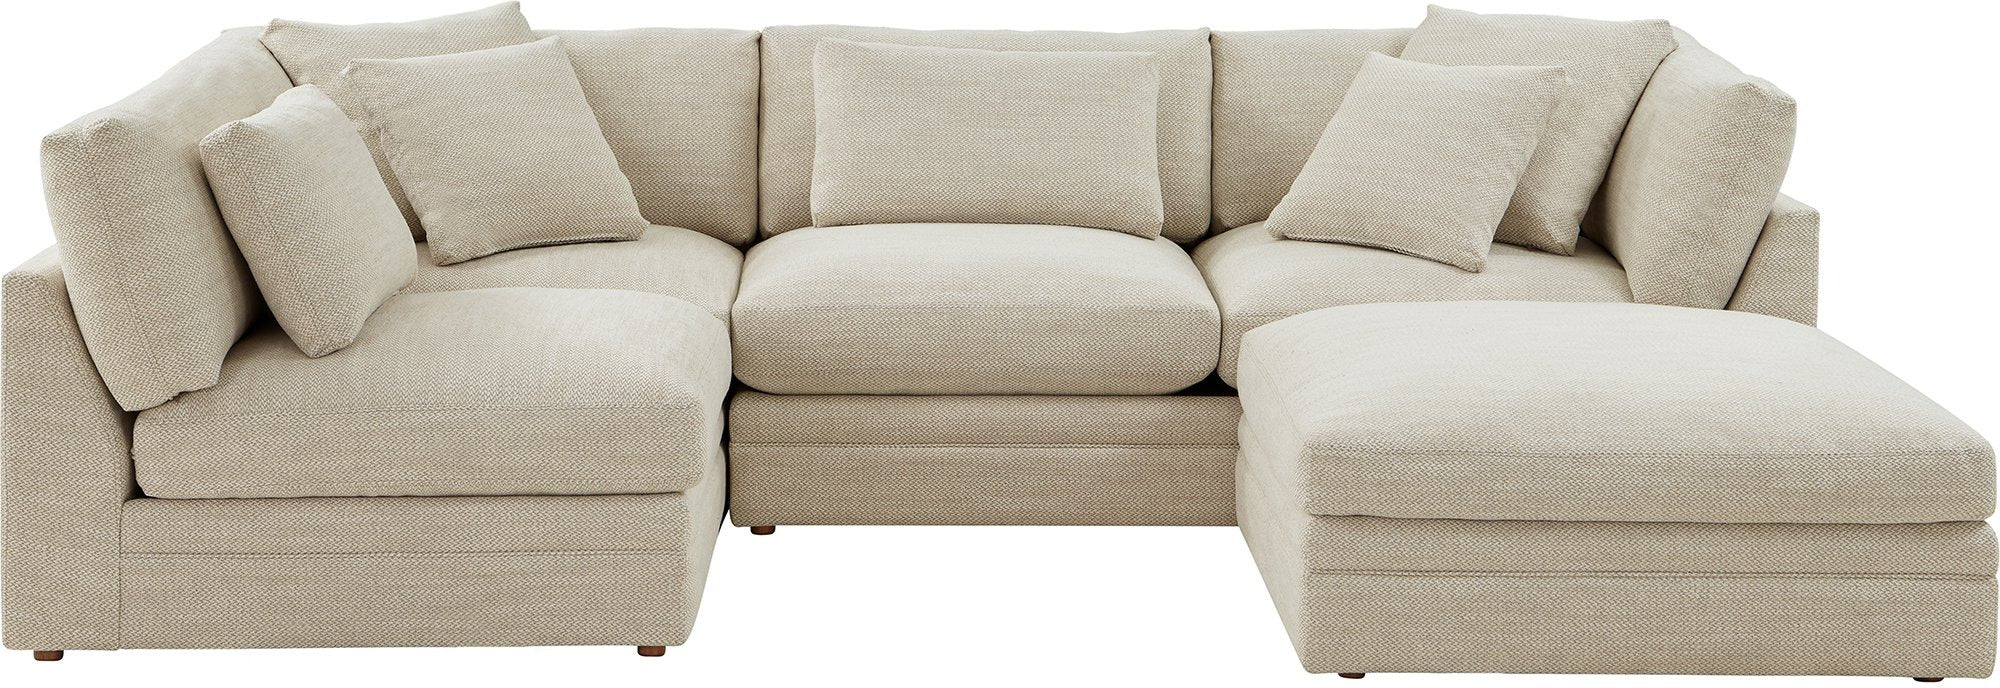 Feel Good Sectional with Ottoman, Left, Oyster - Image 7